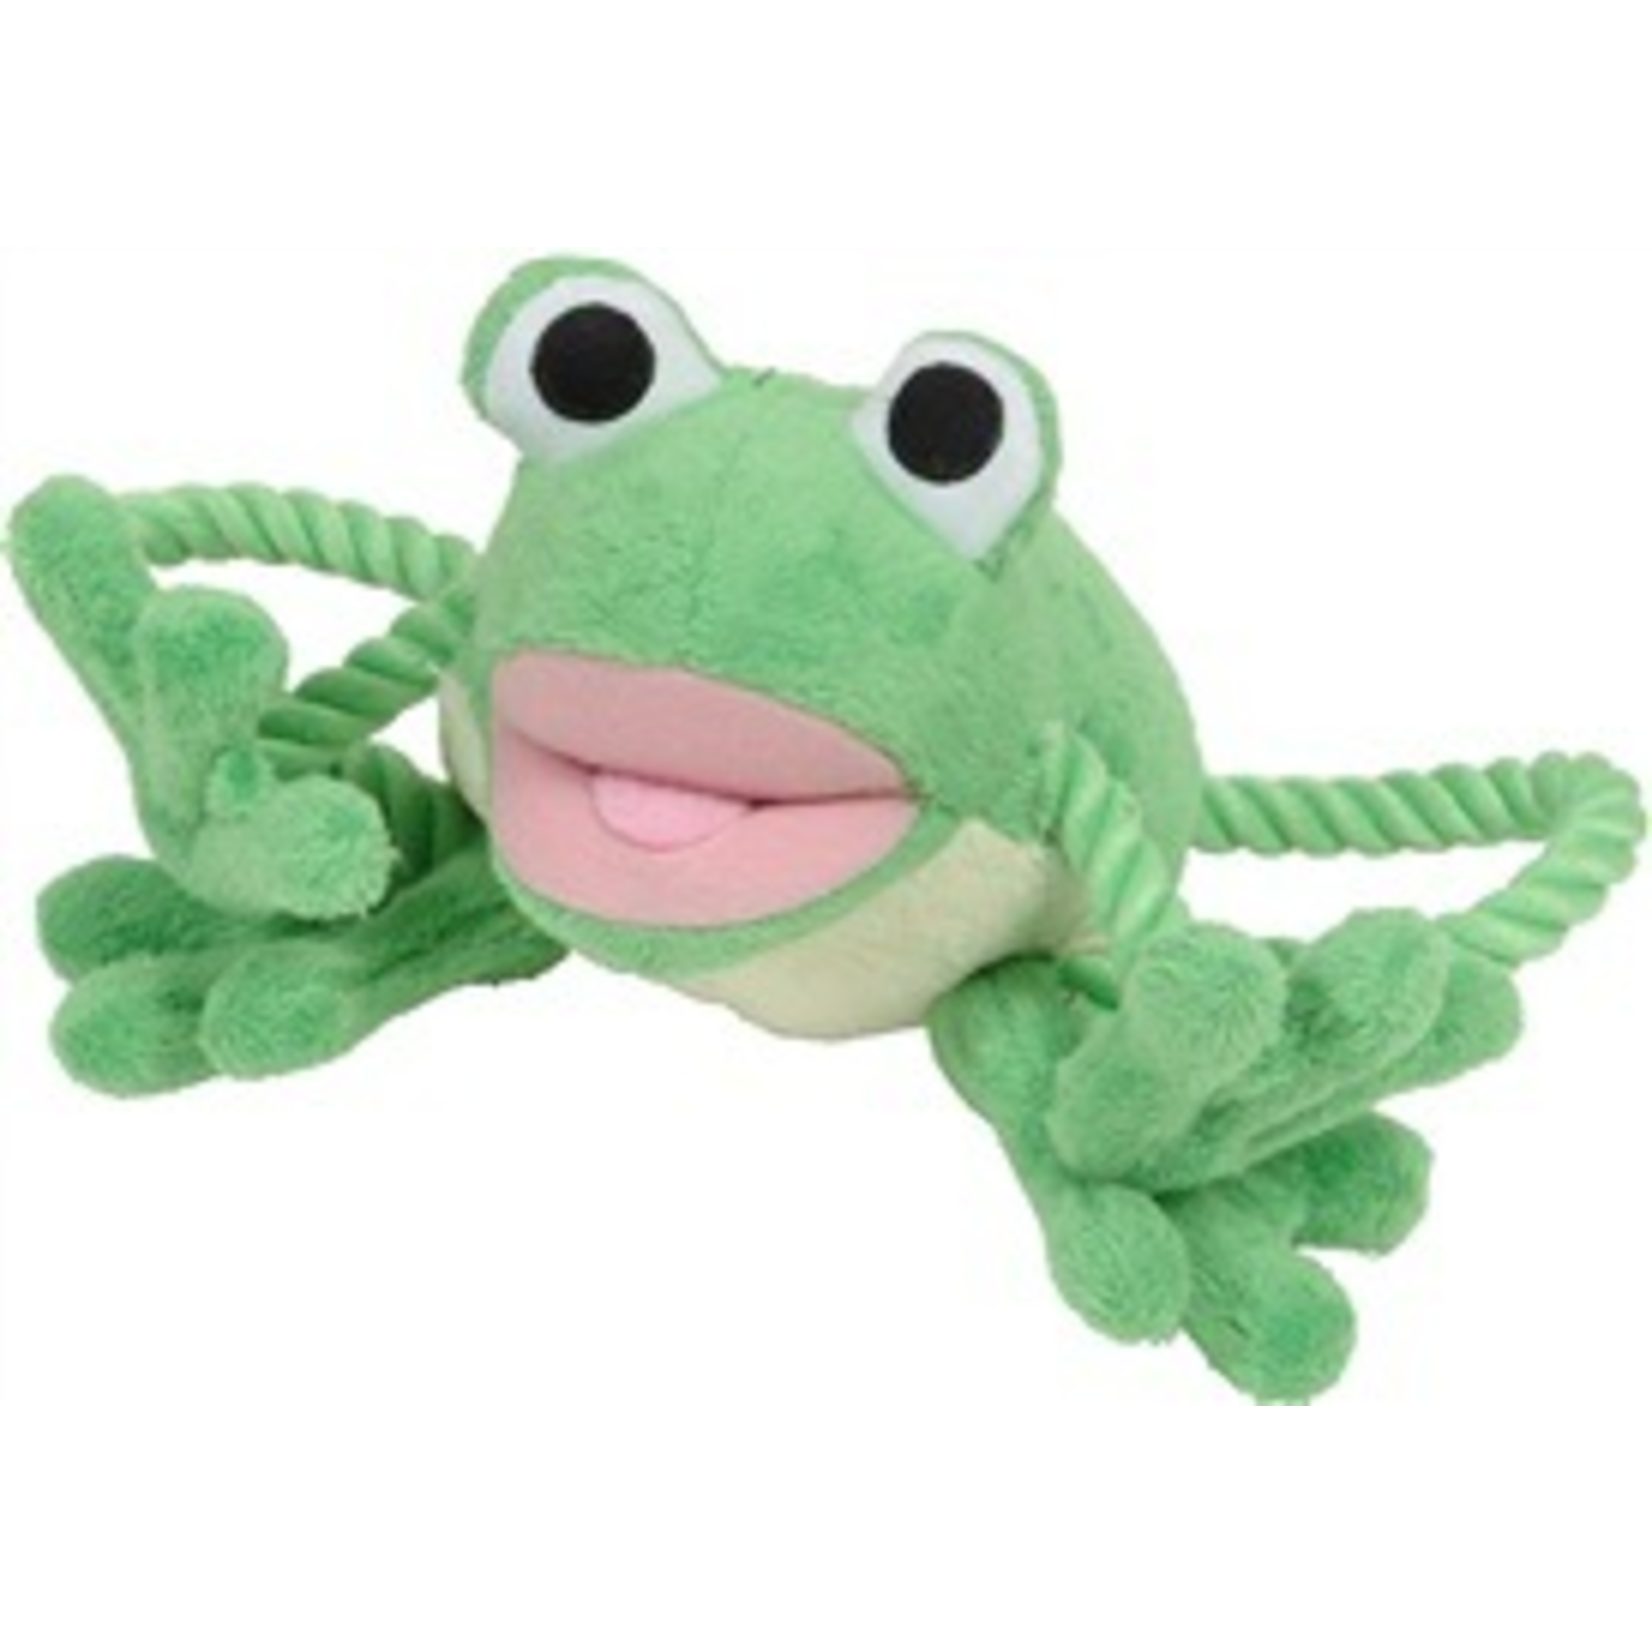 DOG IT (W) Dogit "Puppy Luvz" Plush Dog Toy with Squeaker, Green Frog